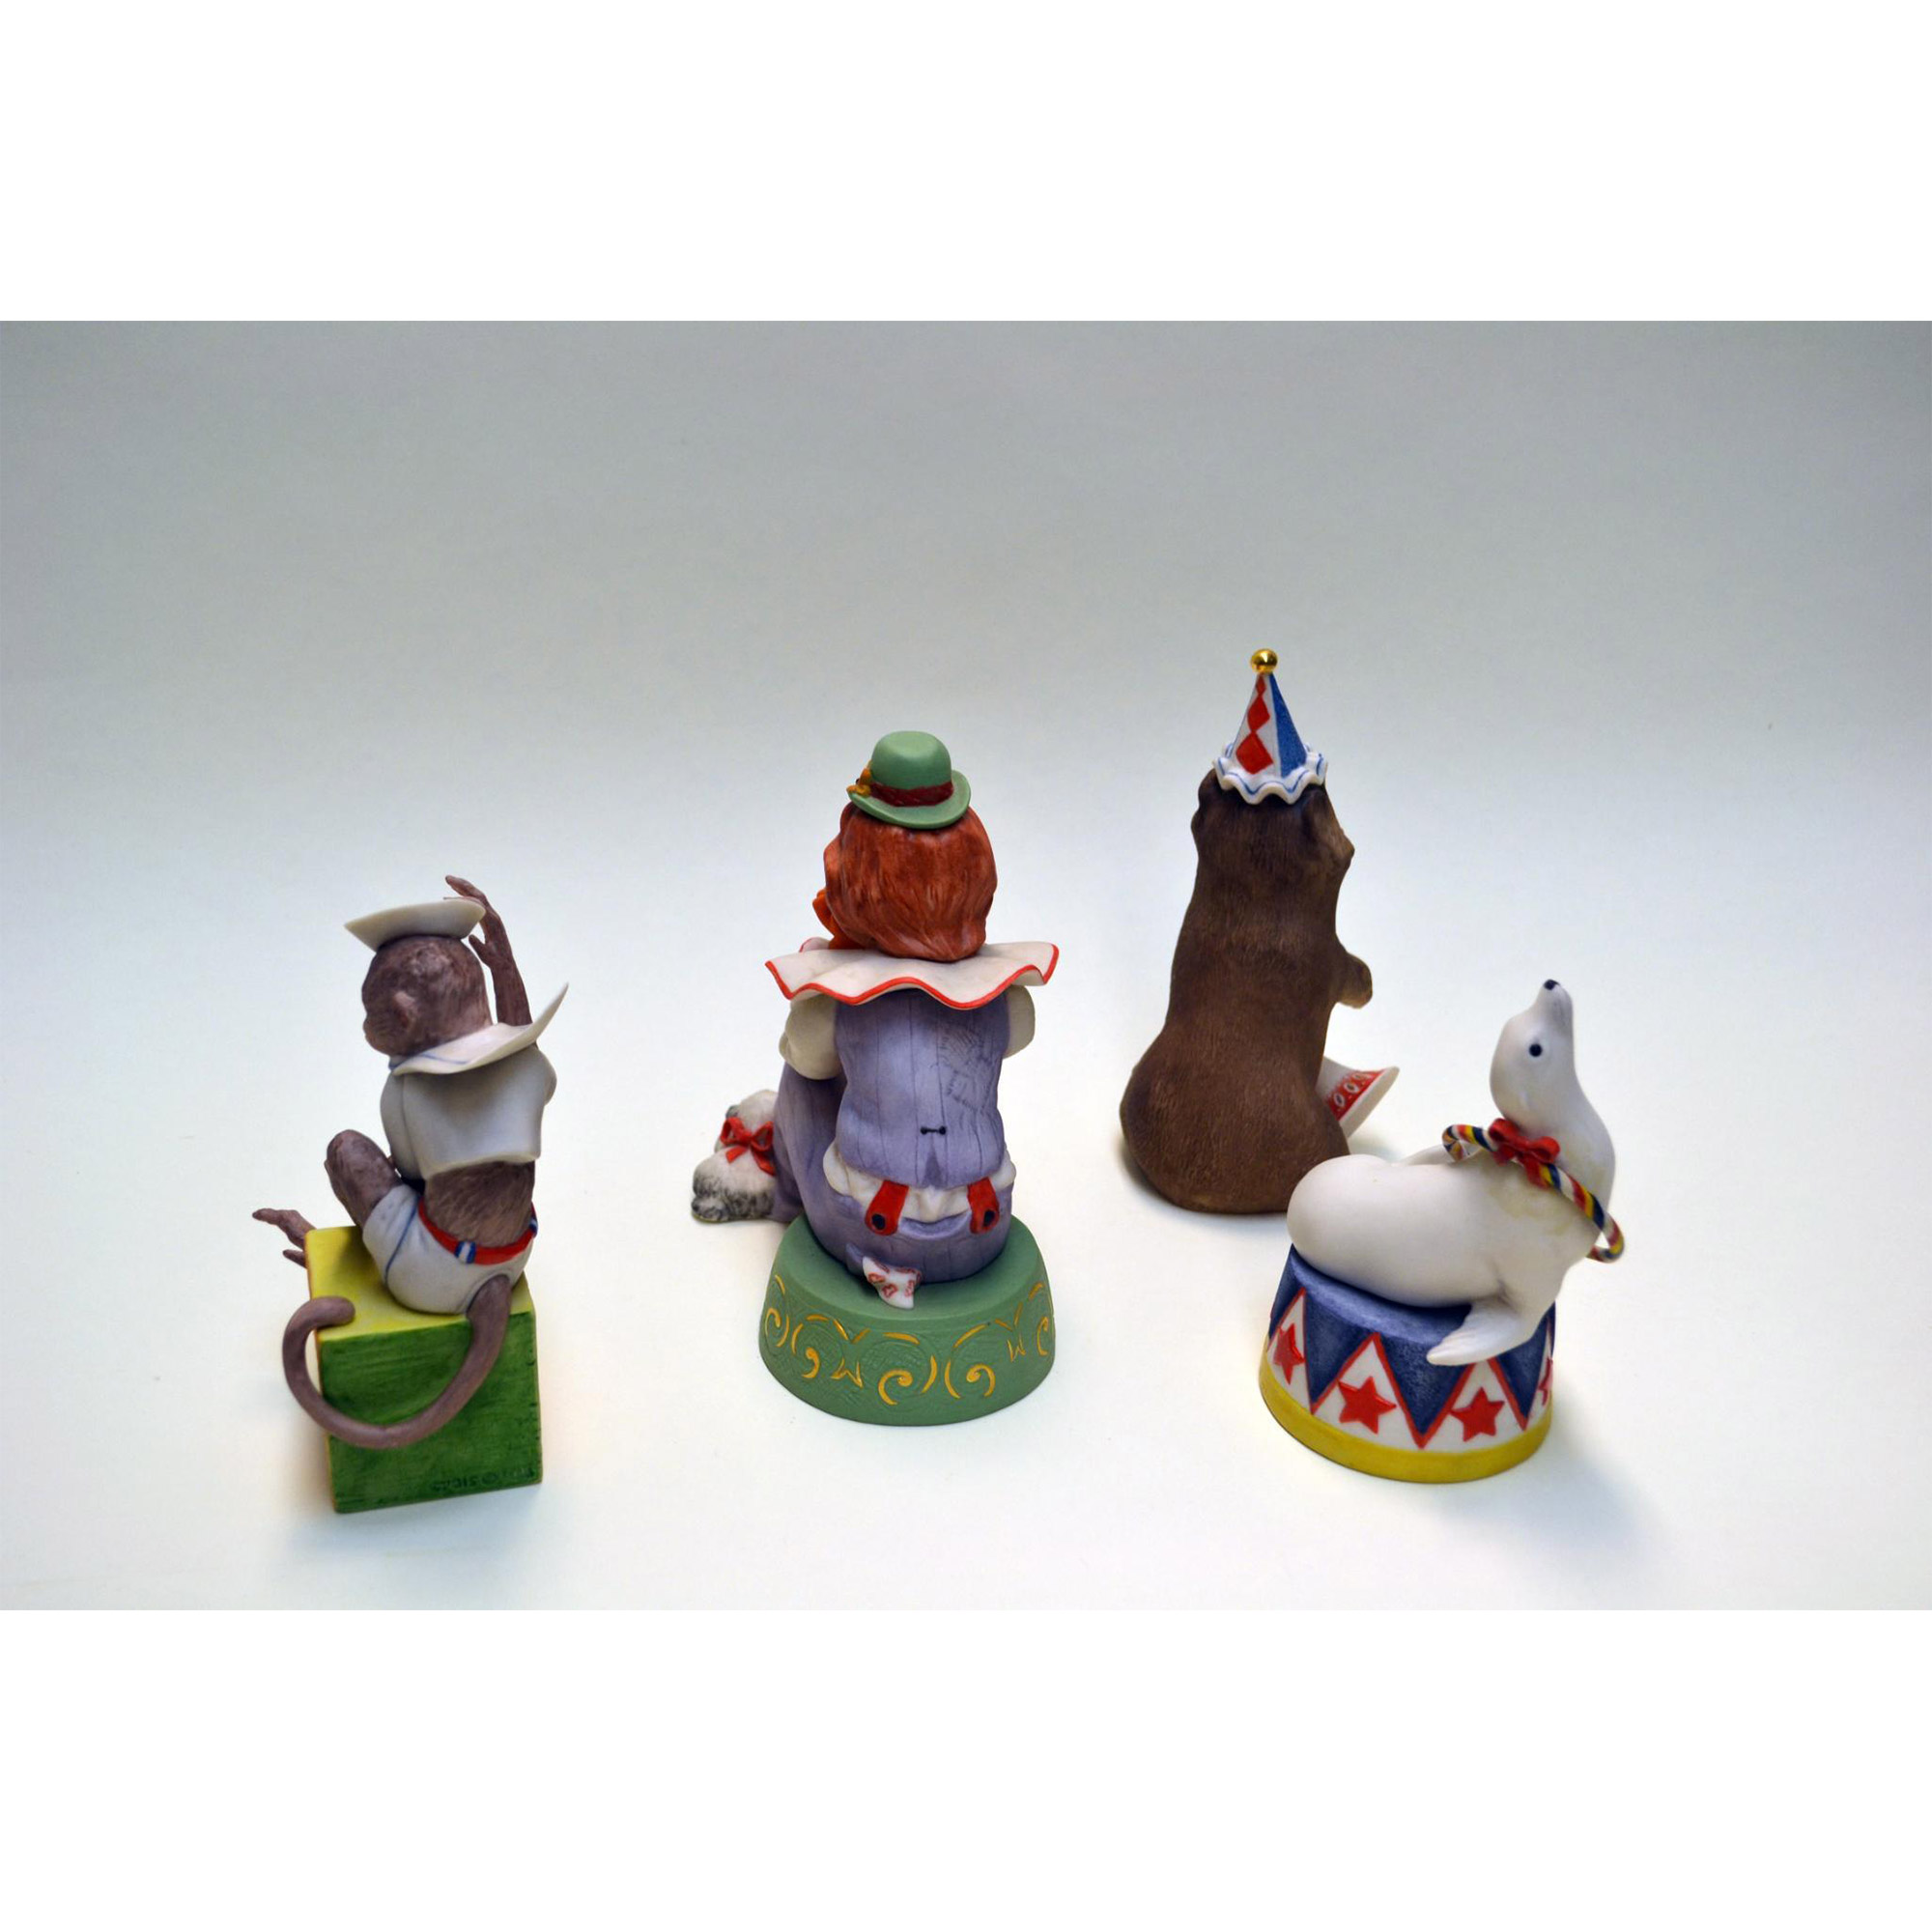 Cybis Porcelain Rumples The Pensive Clown, Barnaby The Bear, Sebastian The Seal And Bosun The Monkey - Image 4 of 5